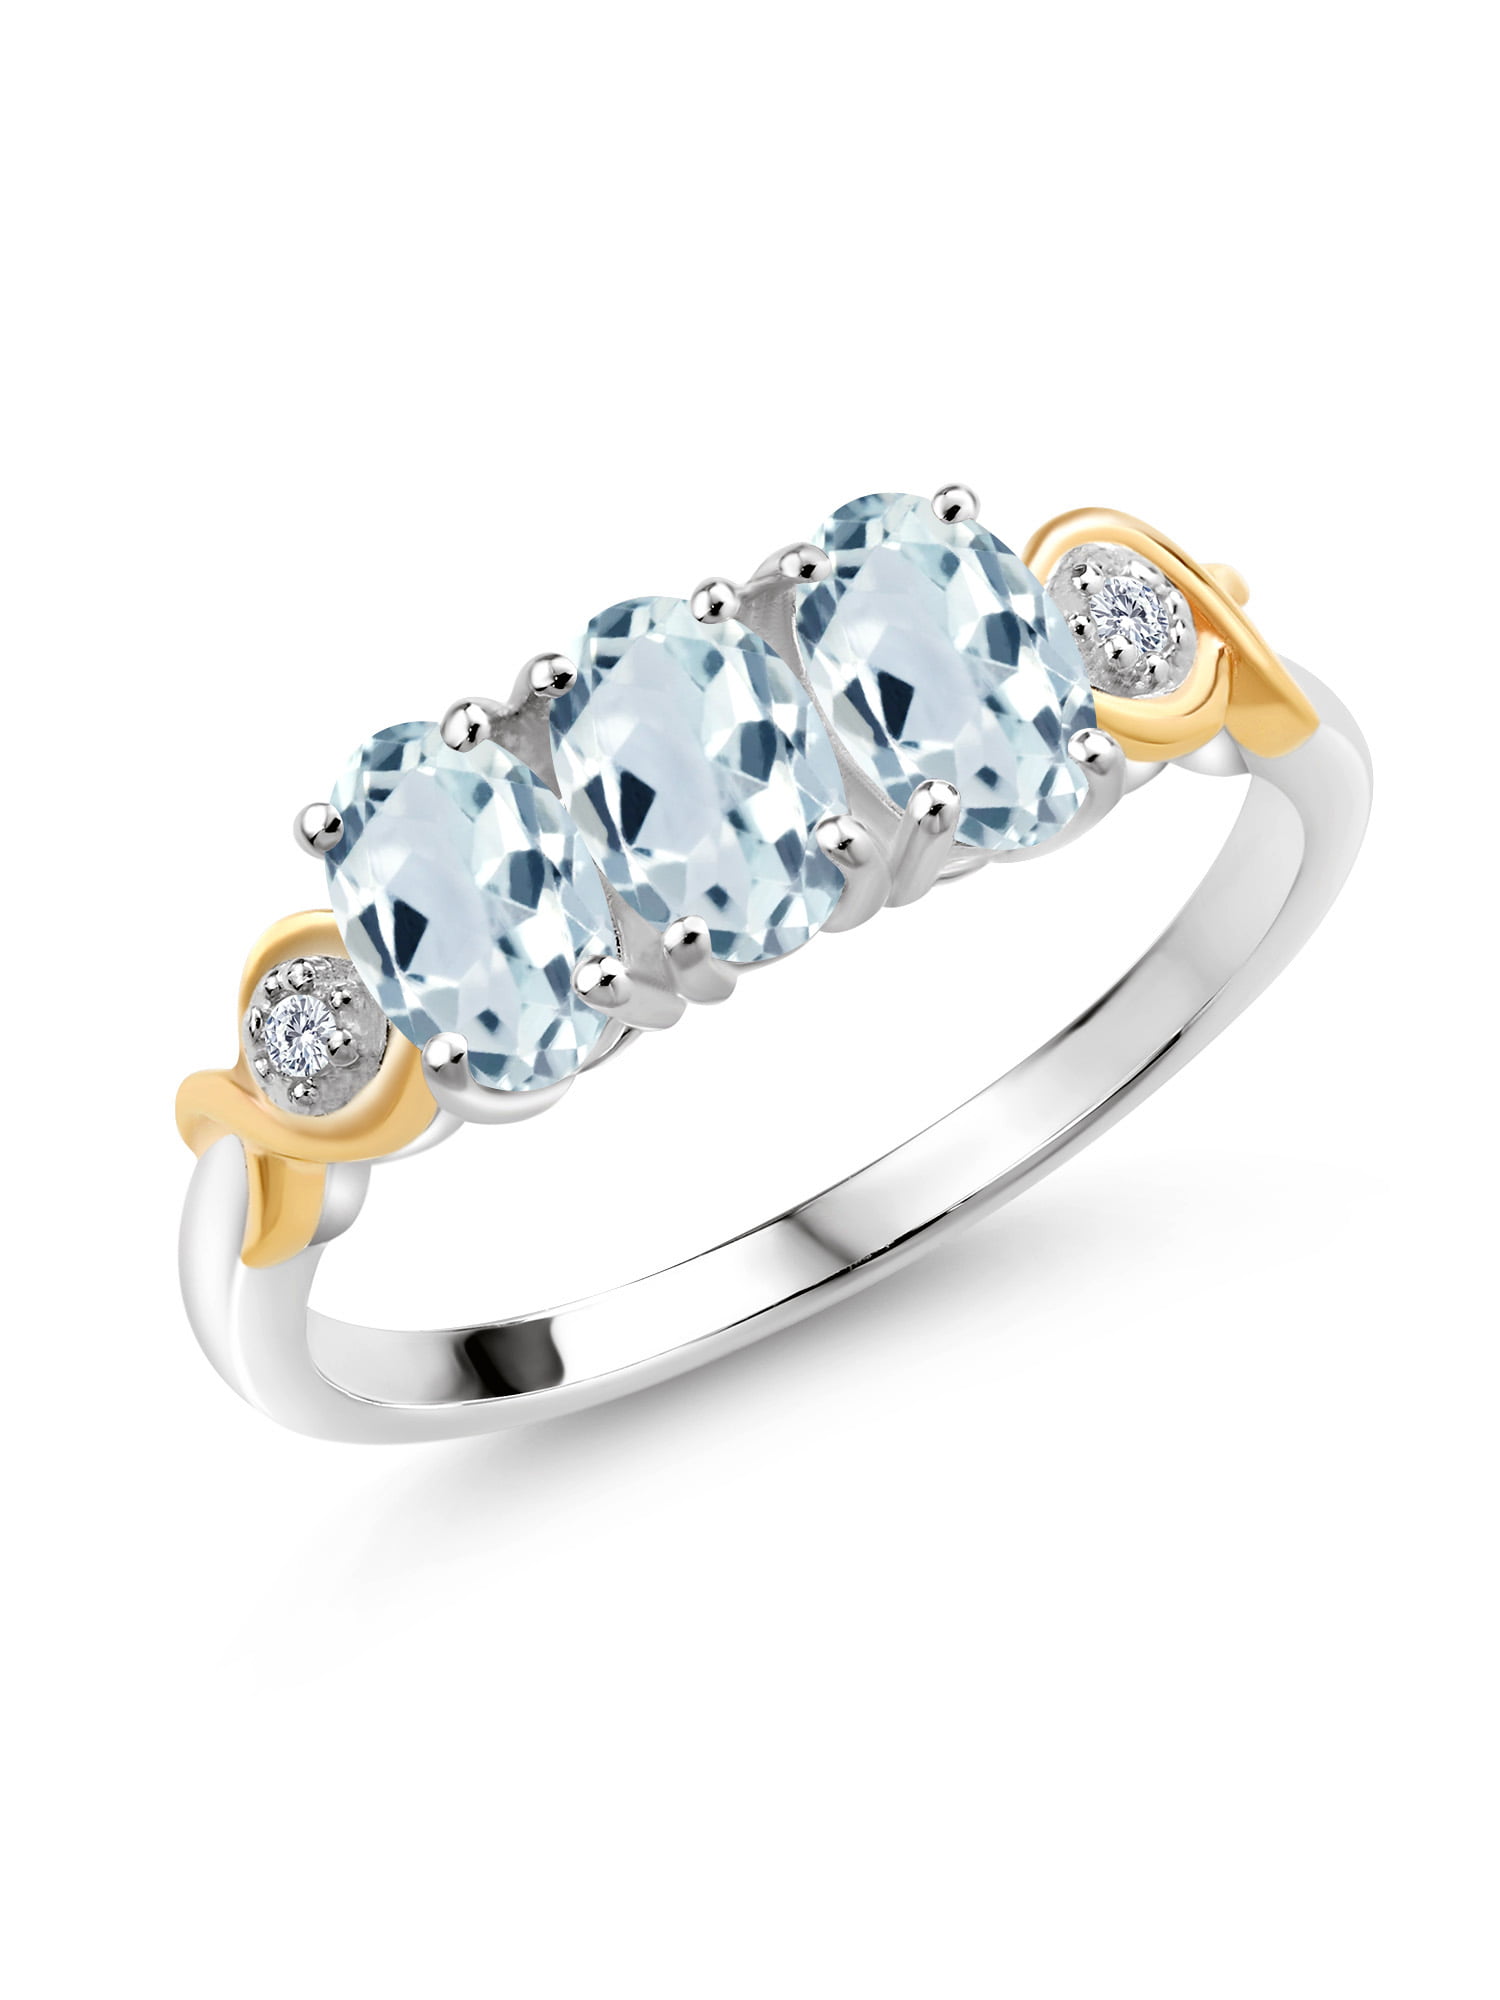 Gem Stone King 1.66 Ct Oval Sky Blue Aquamarine 18K Yellow Gold Plated Silver Ring 